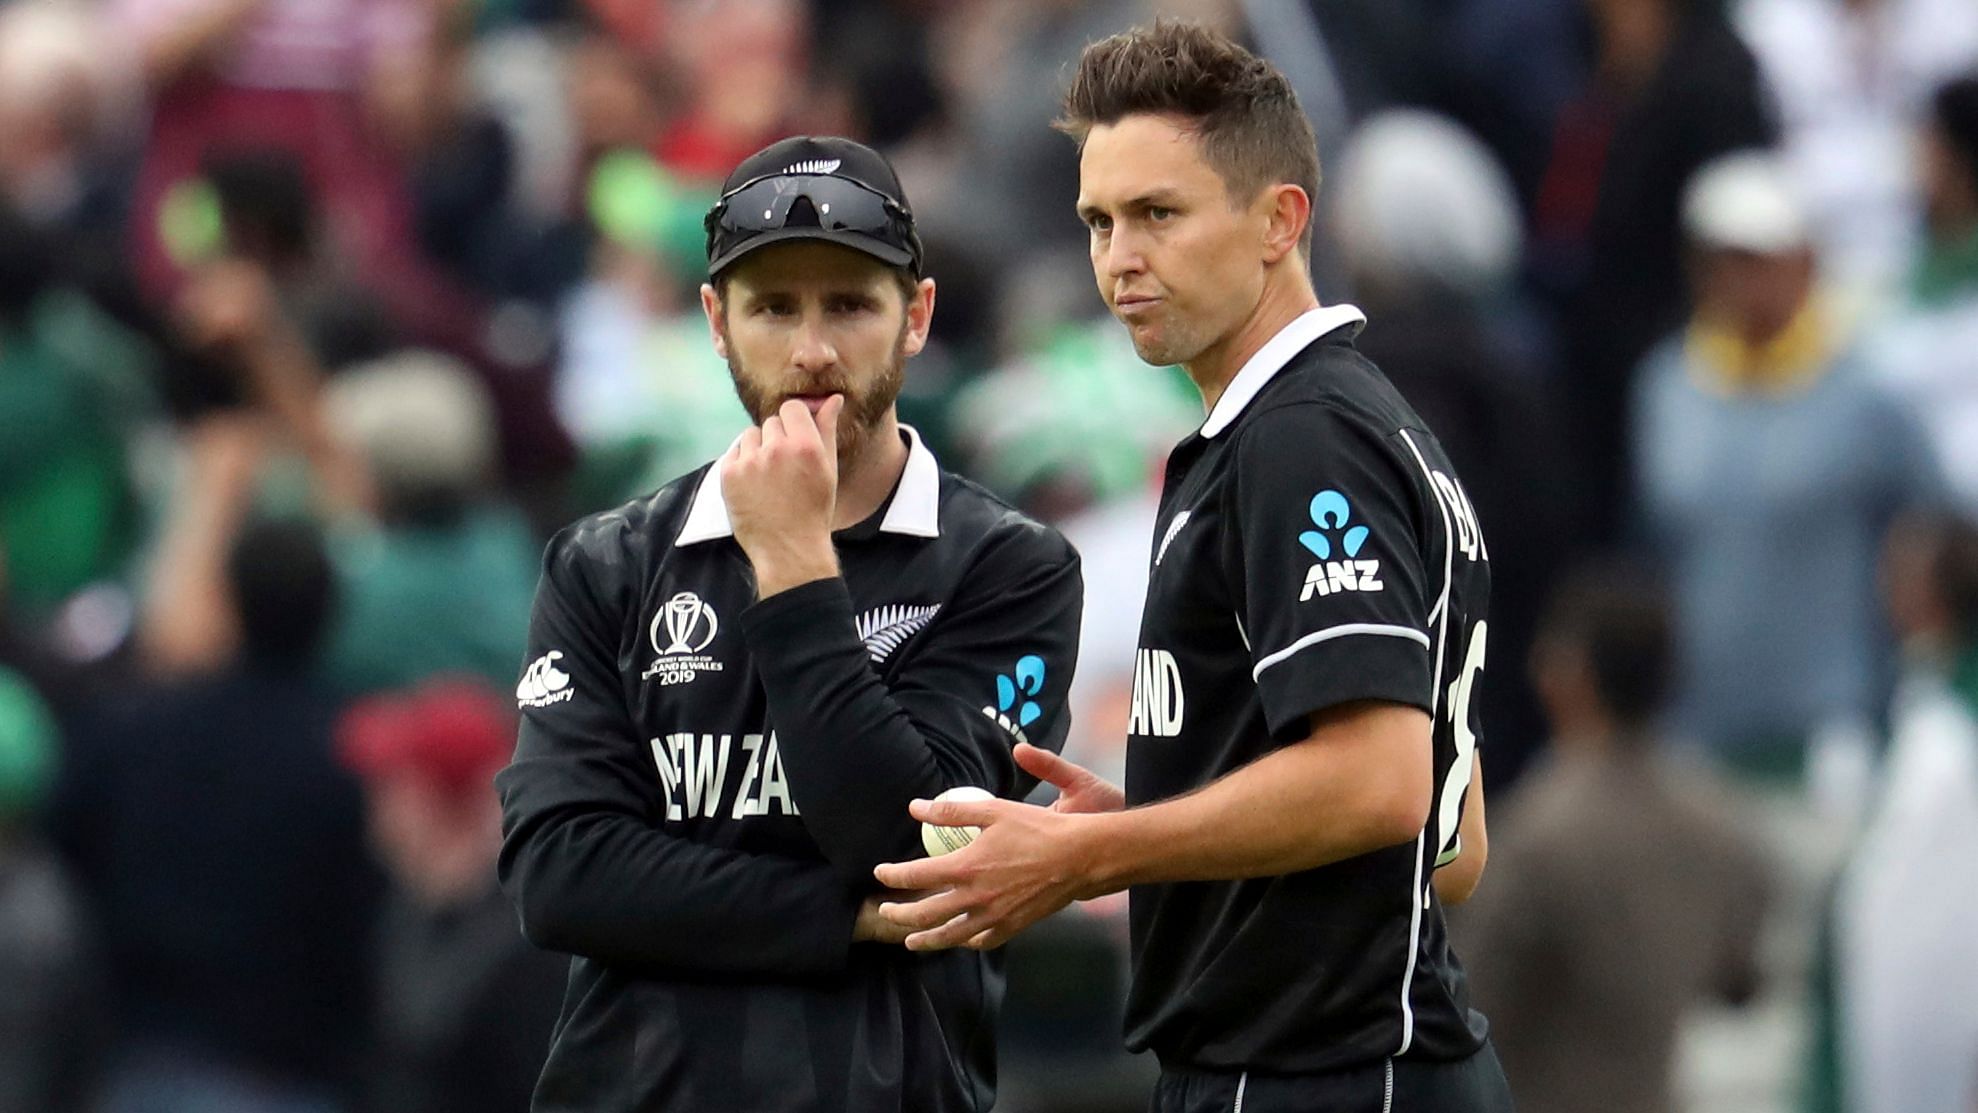 Trent Boult finished with figures of 4/51